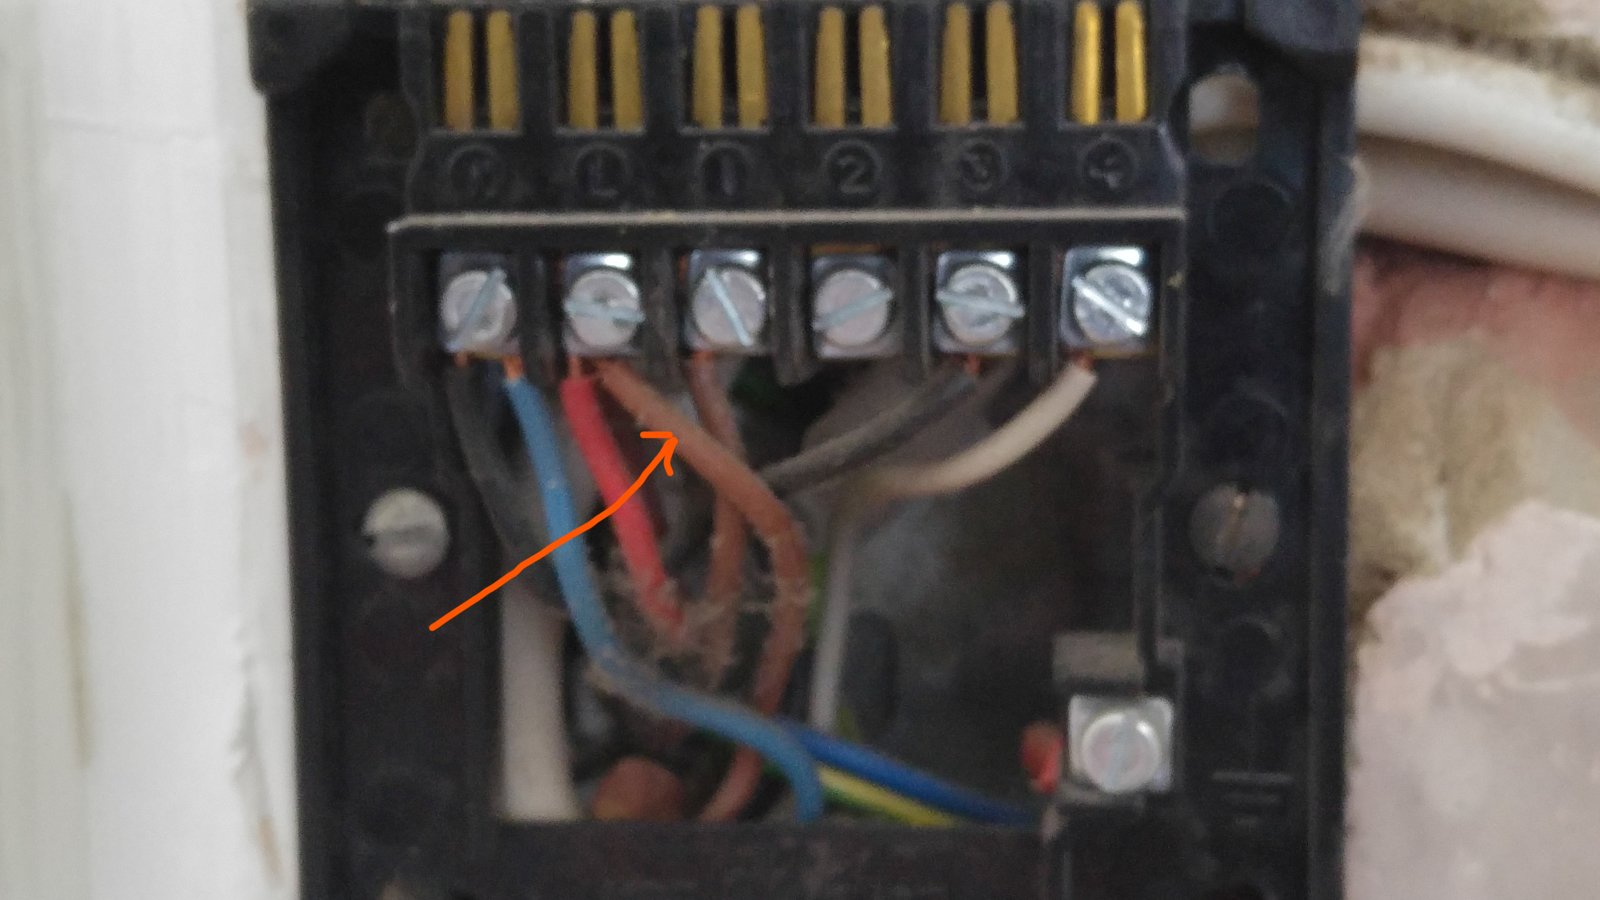 old wiring block connections for programmer.jpg